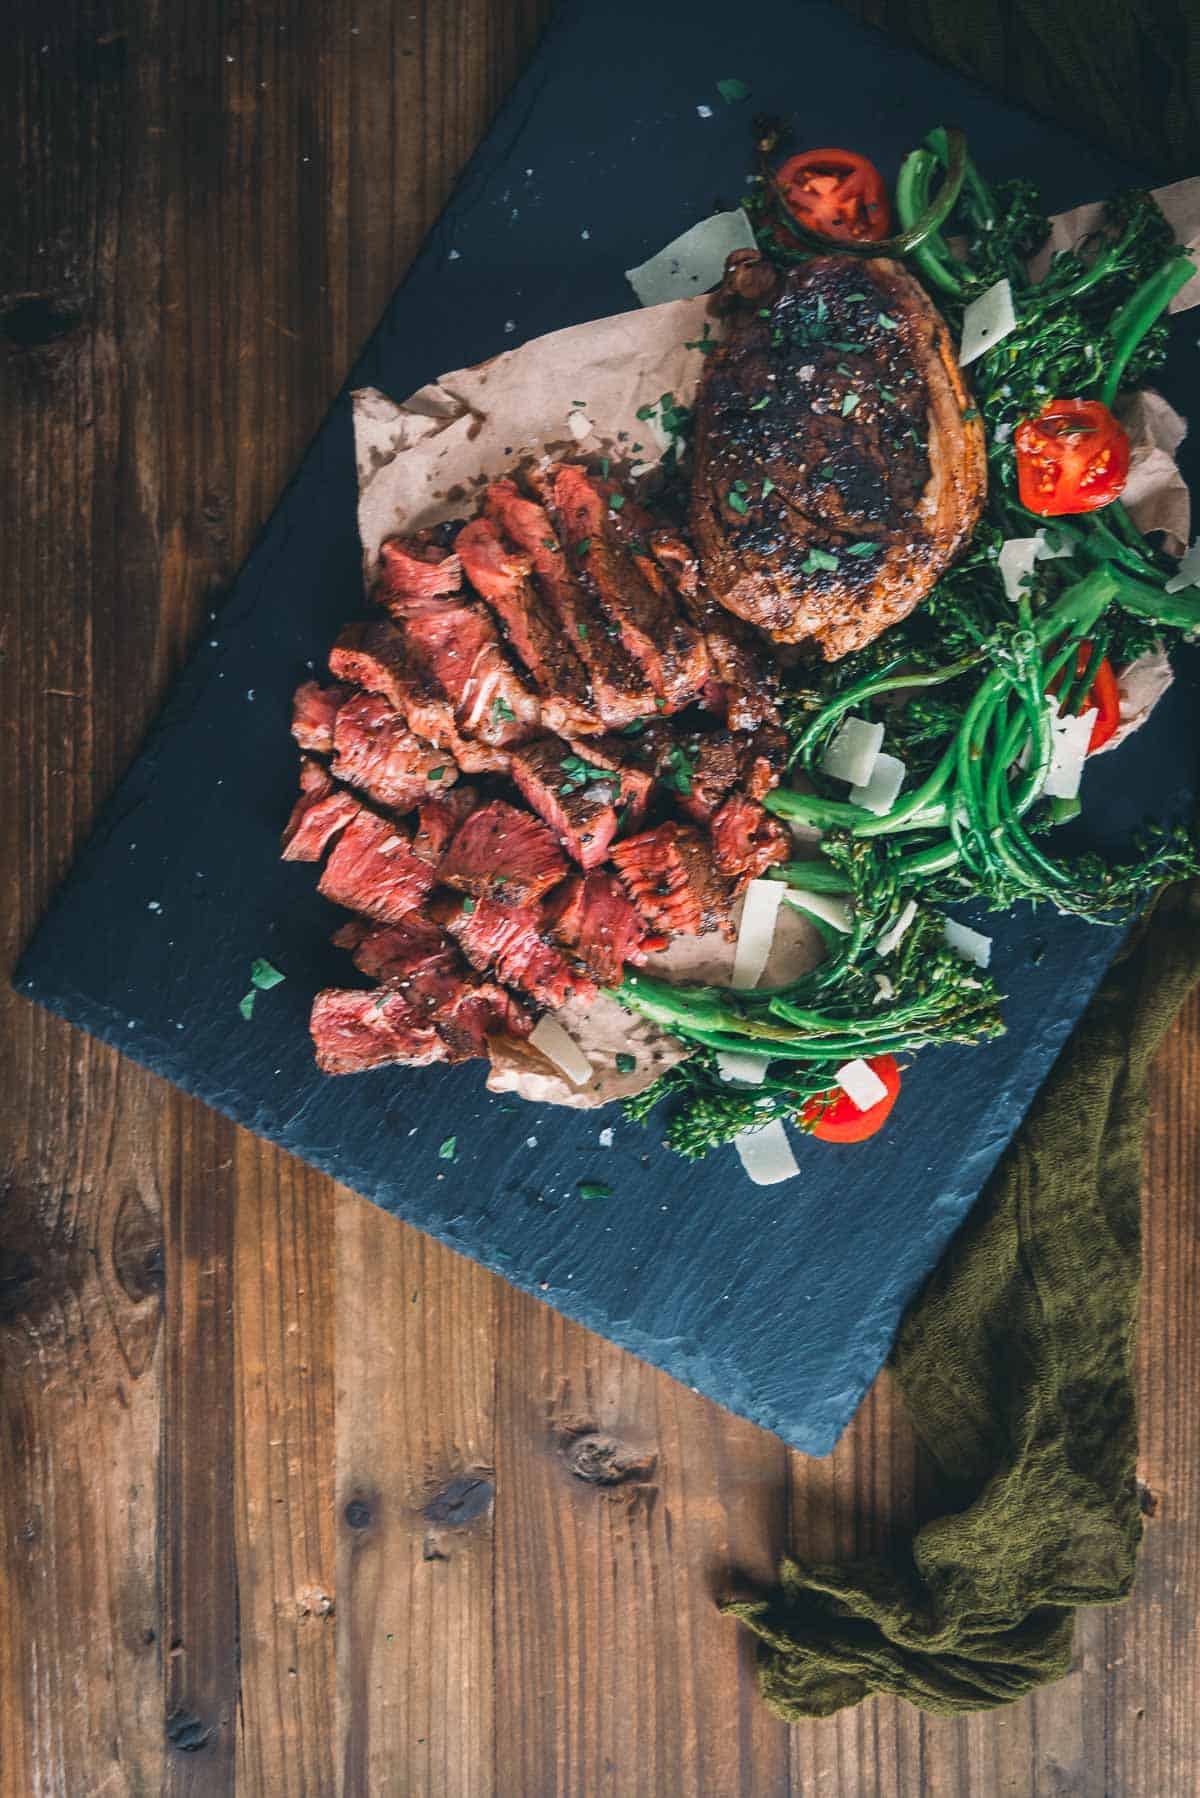 Sliced steak on a serving board on a wooden table.